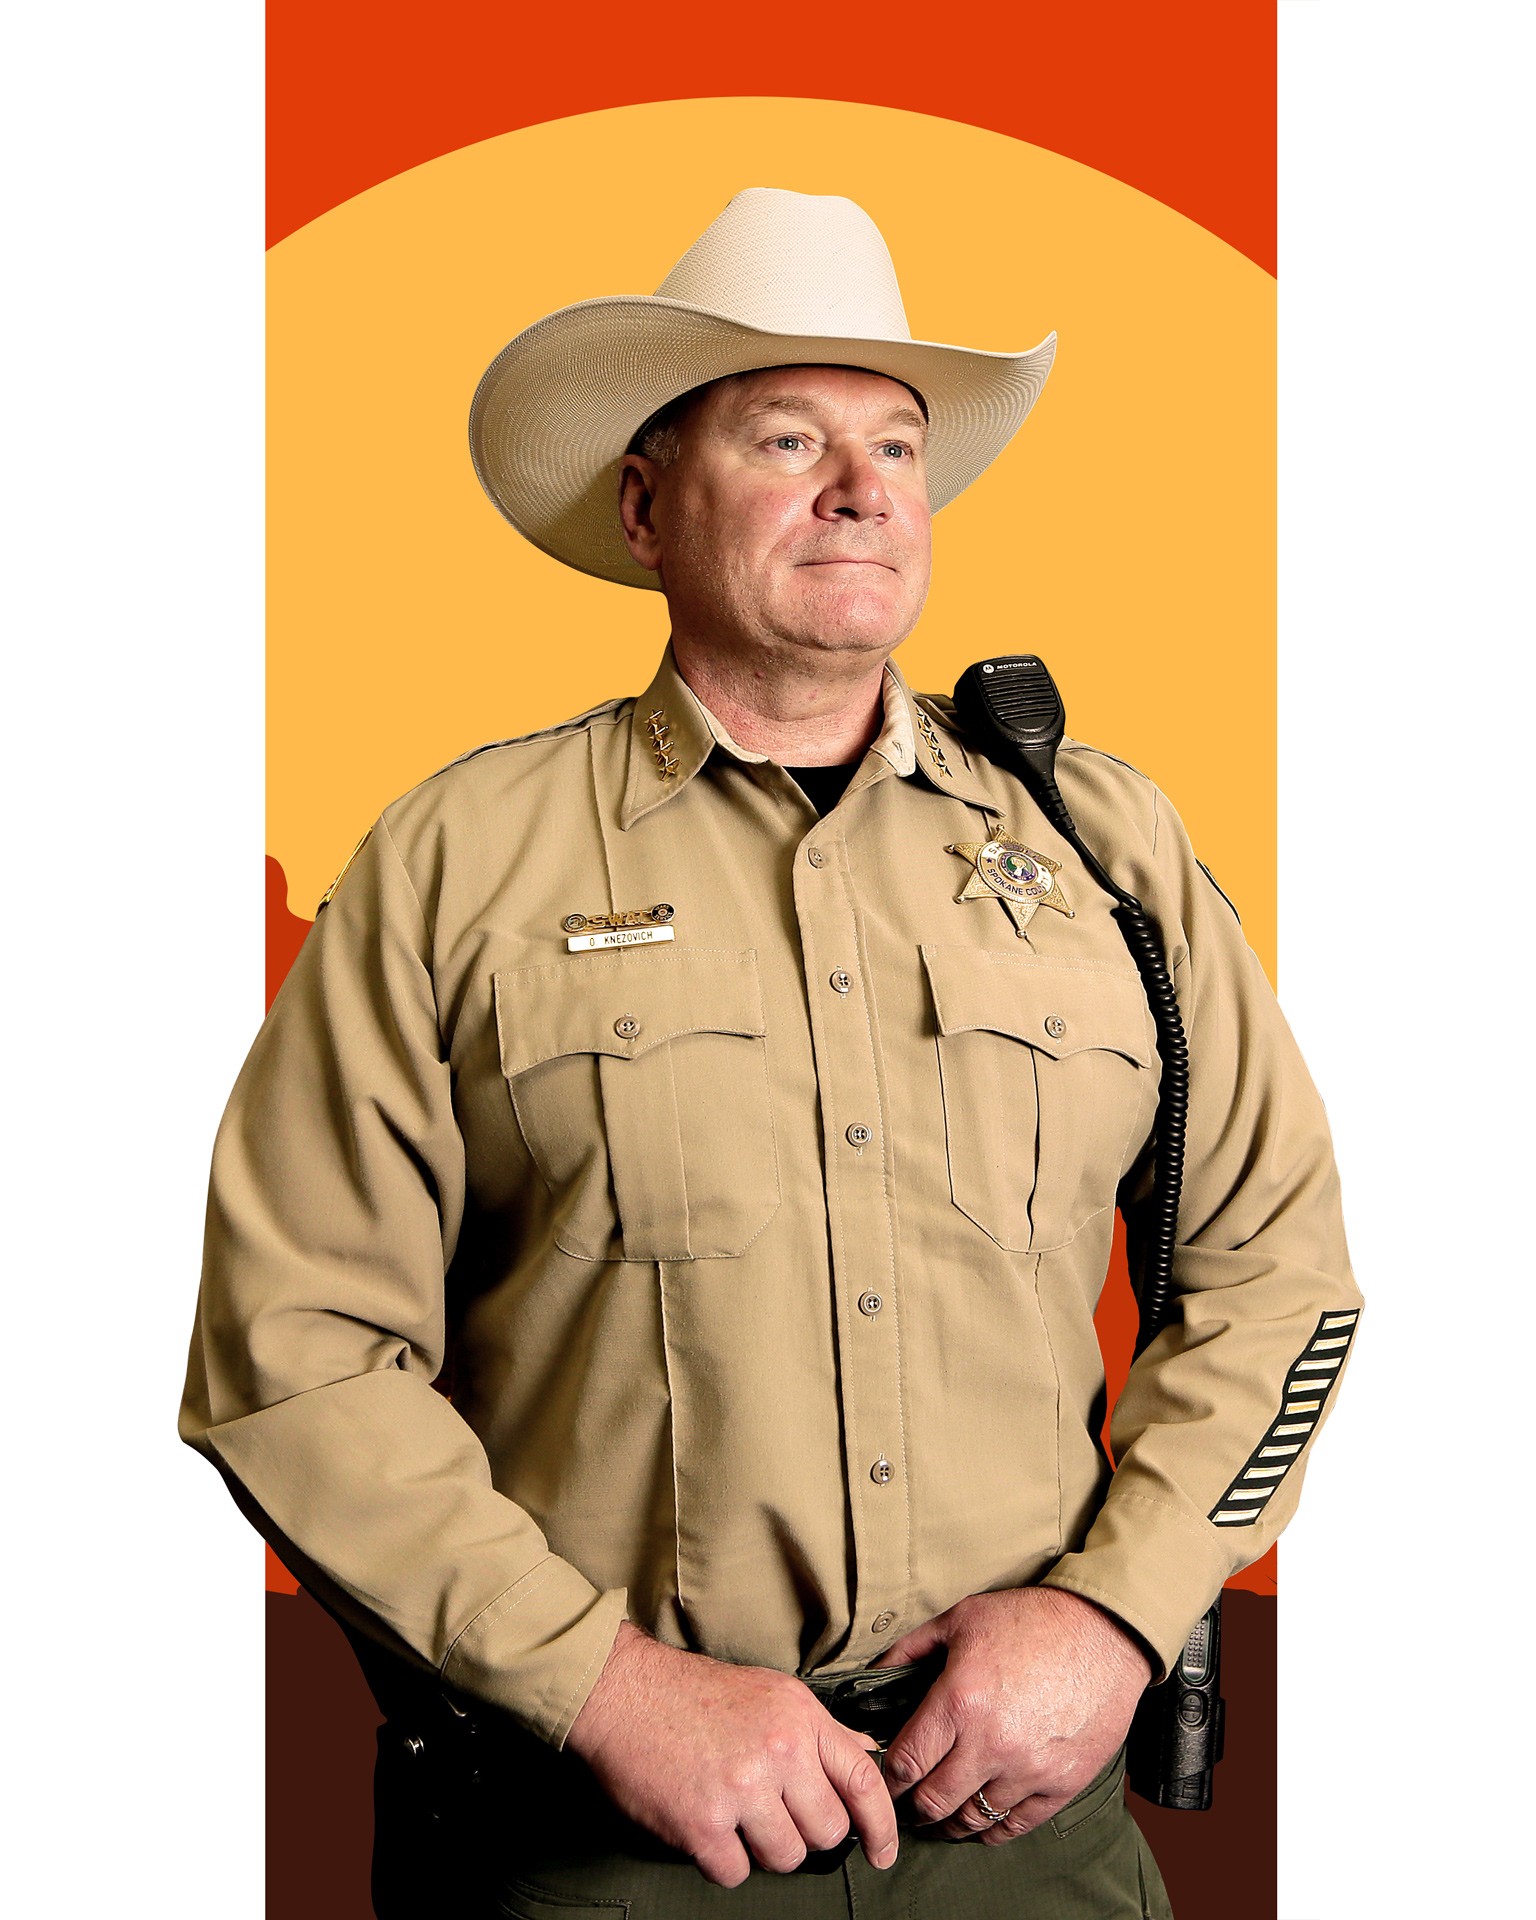 Liberty County's Texas Ranger gets new assignment, new Ranger appointed